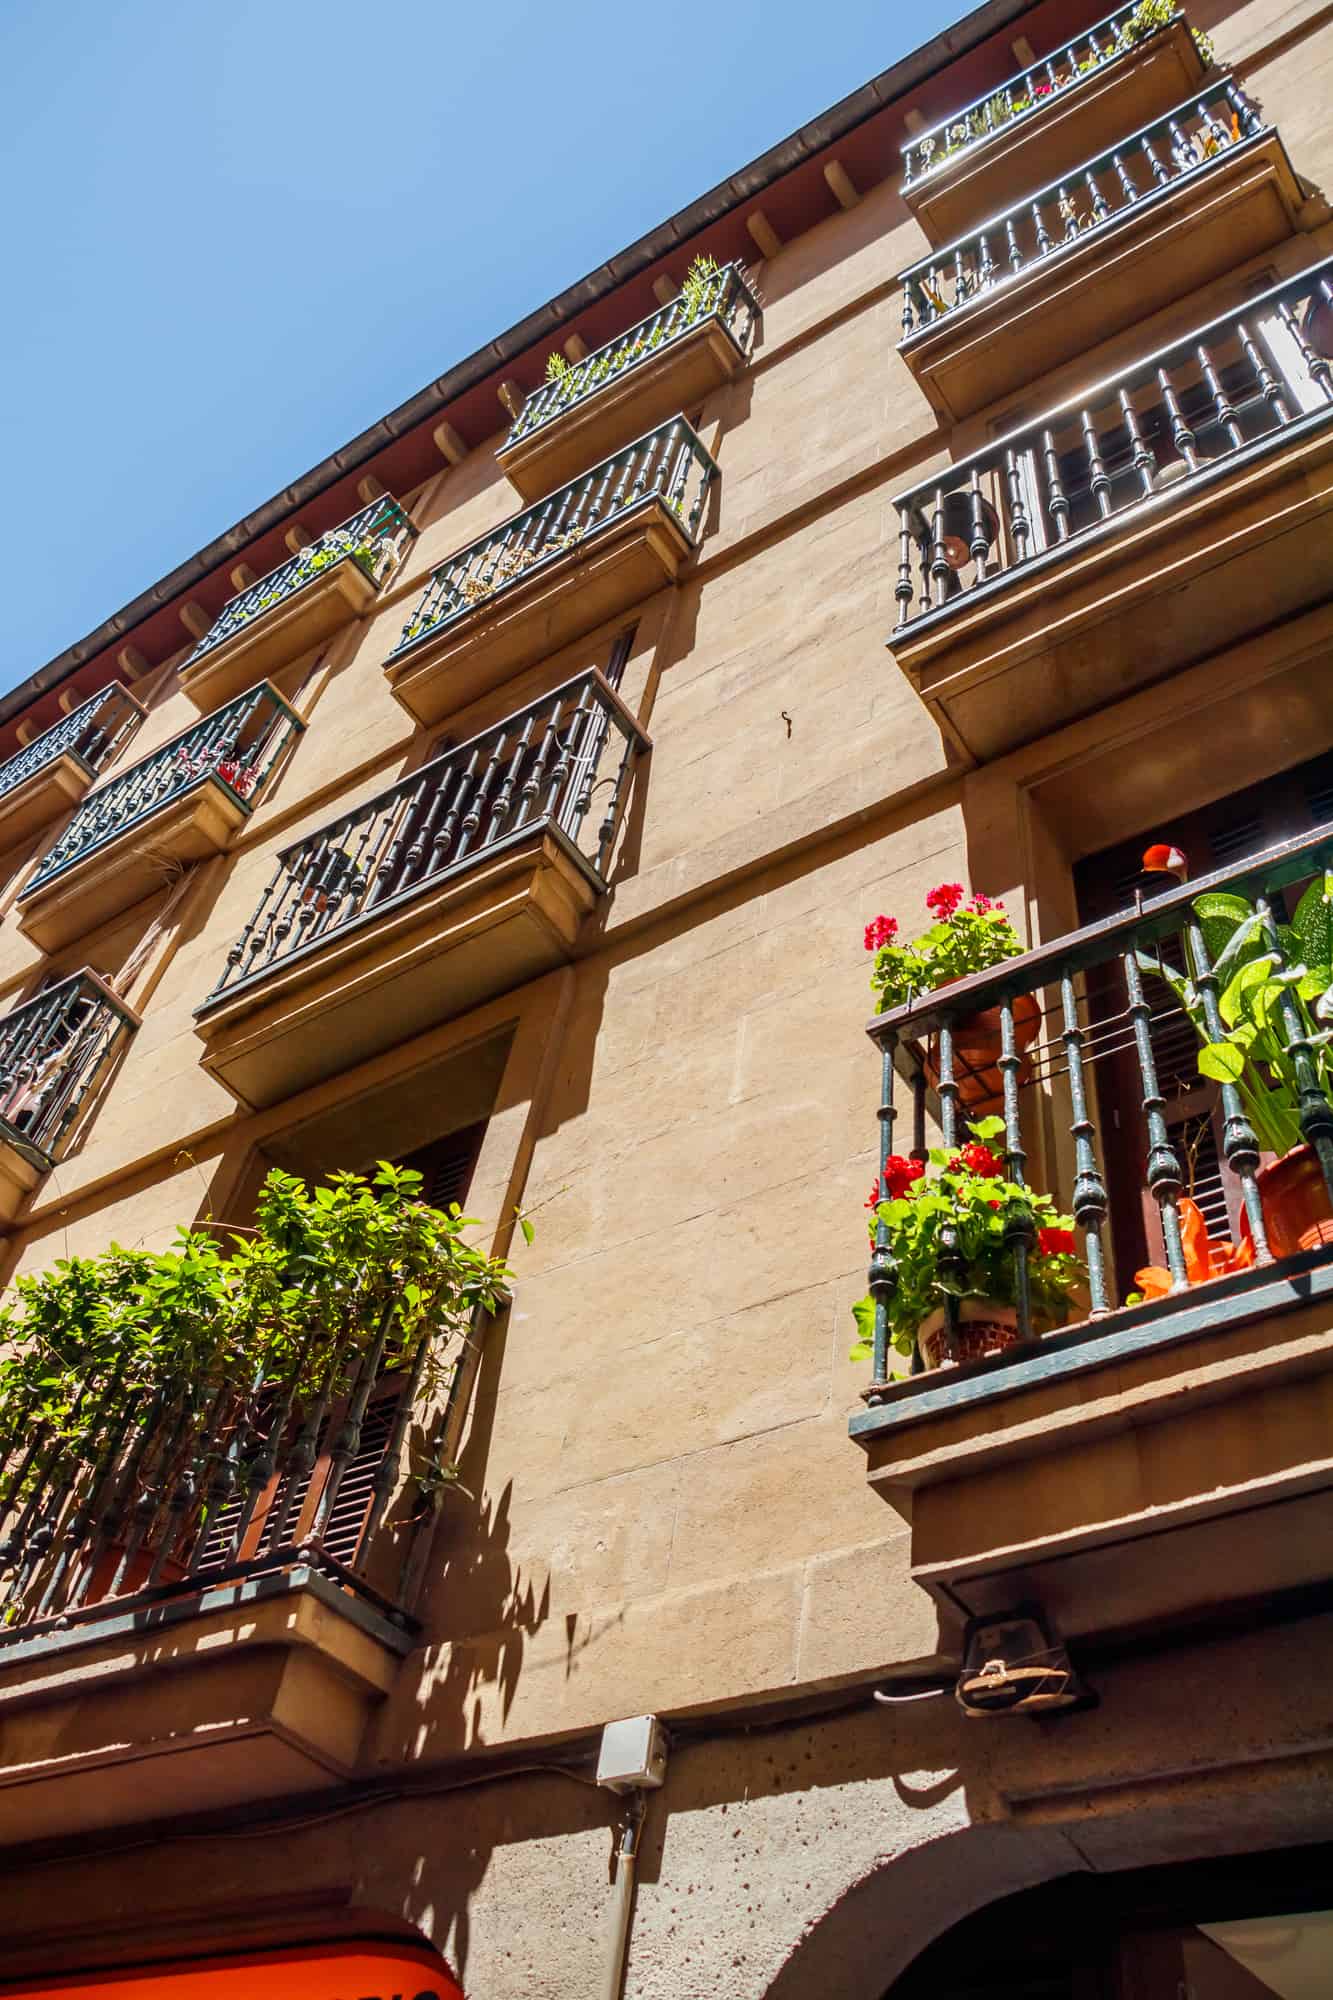 Typical architecture of Sab Sebastian City in Spain